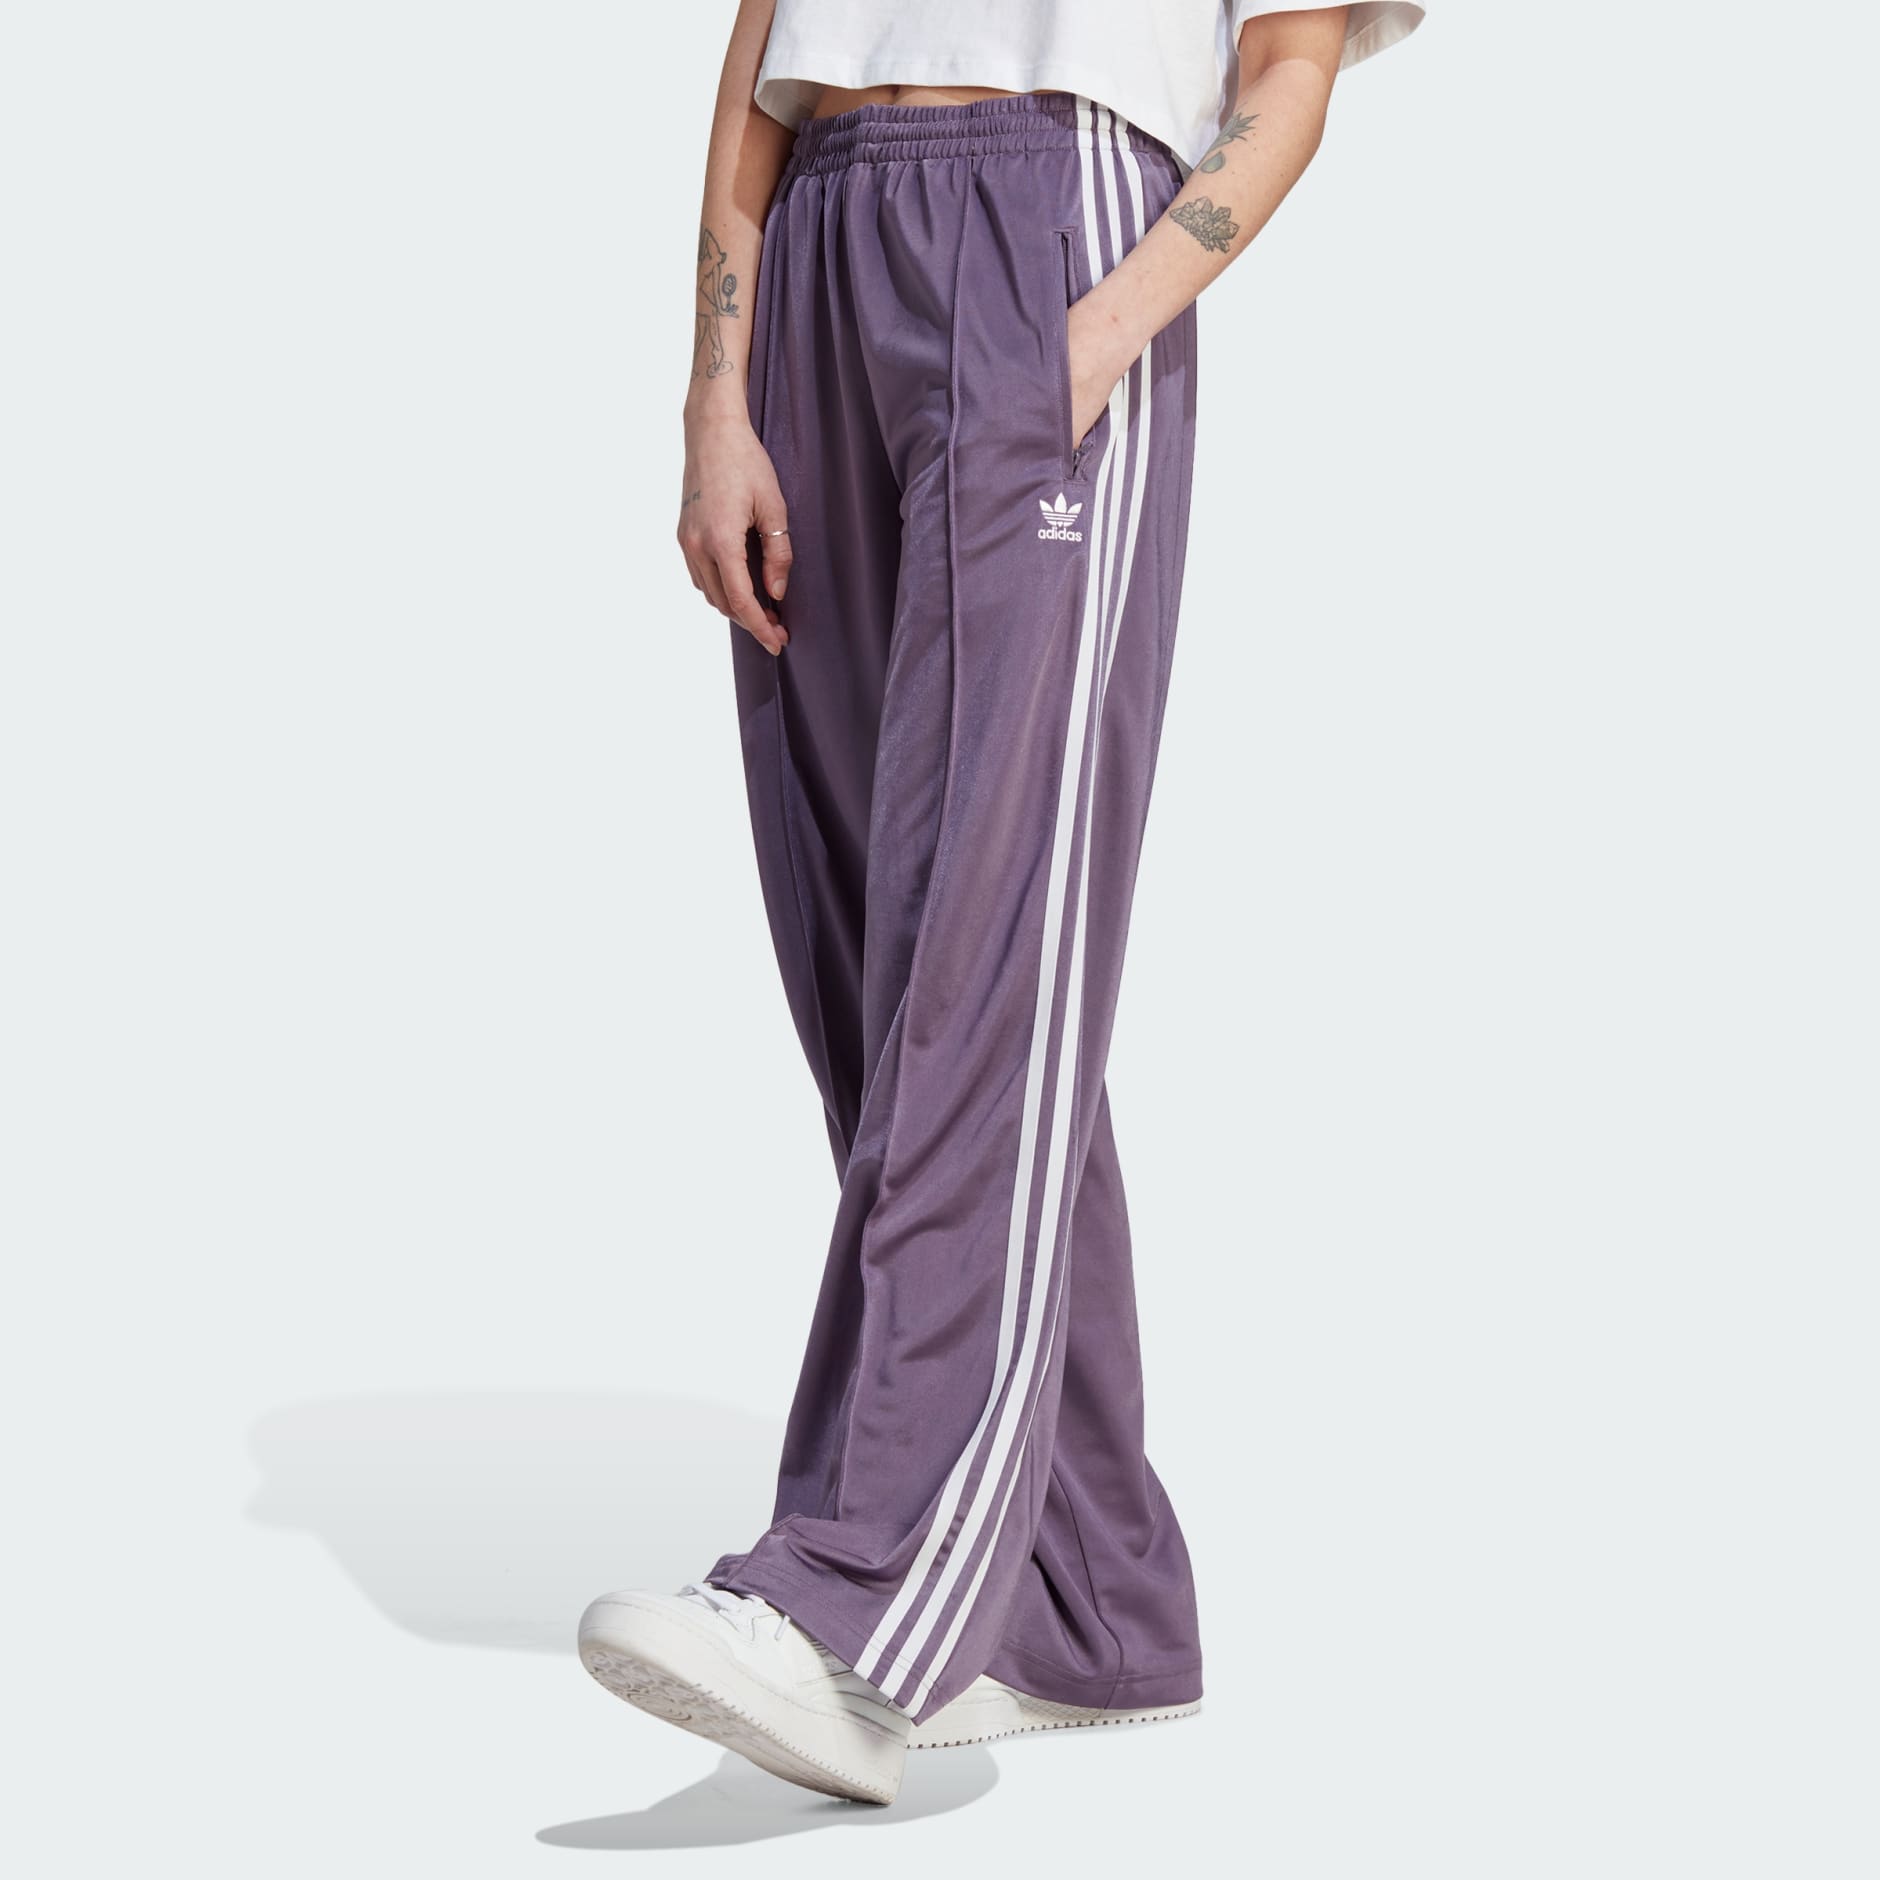 BLUECON Women's Side Striped Polyester Track Pants Pack of 2 : Amazon.in:  Clothing & Accessories